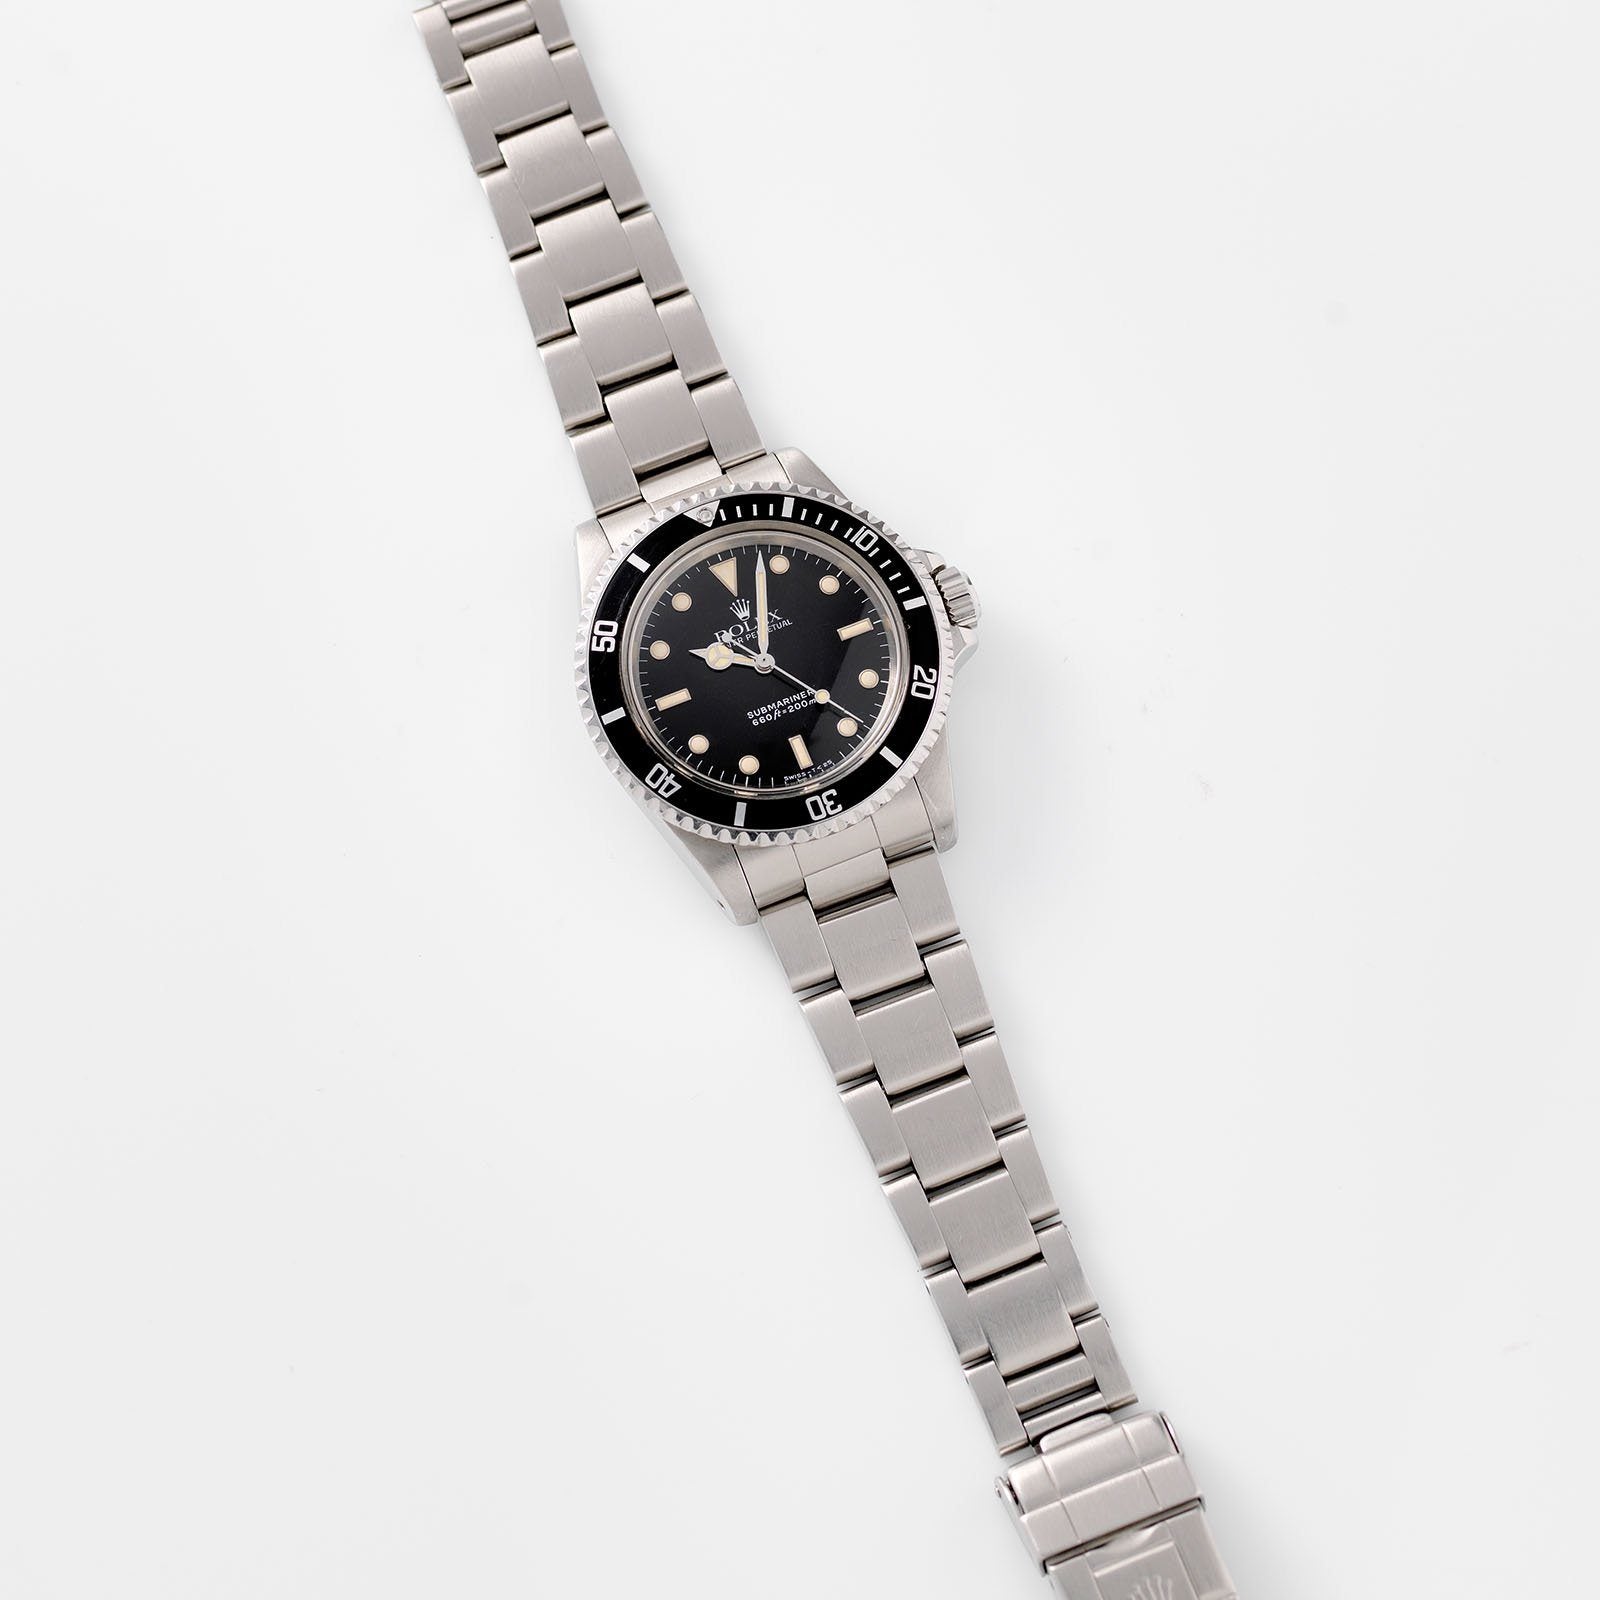 Rolex Submariner 5513 with White Gold Hour Markers